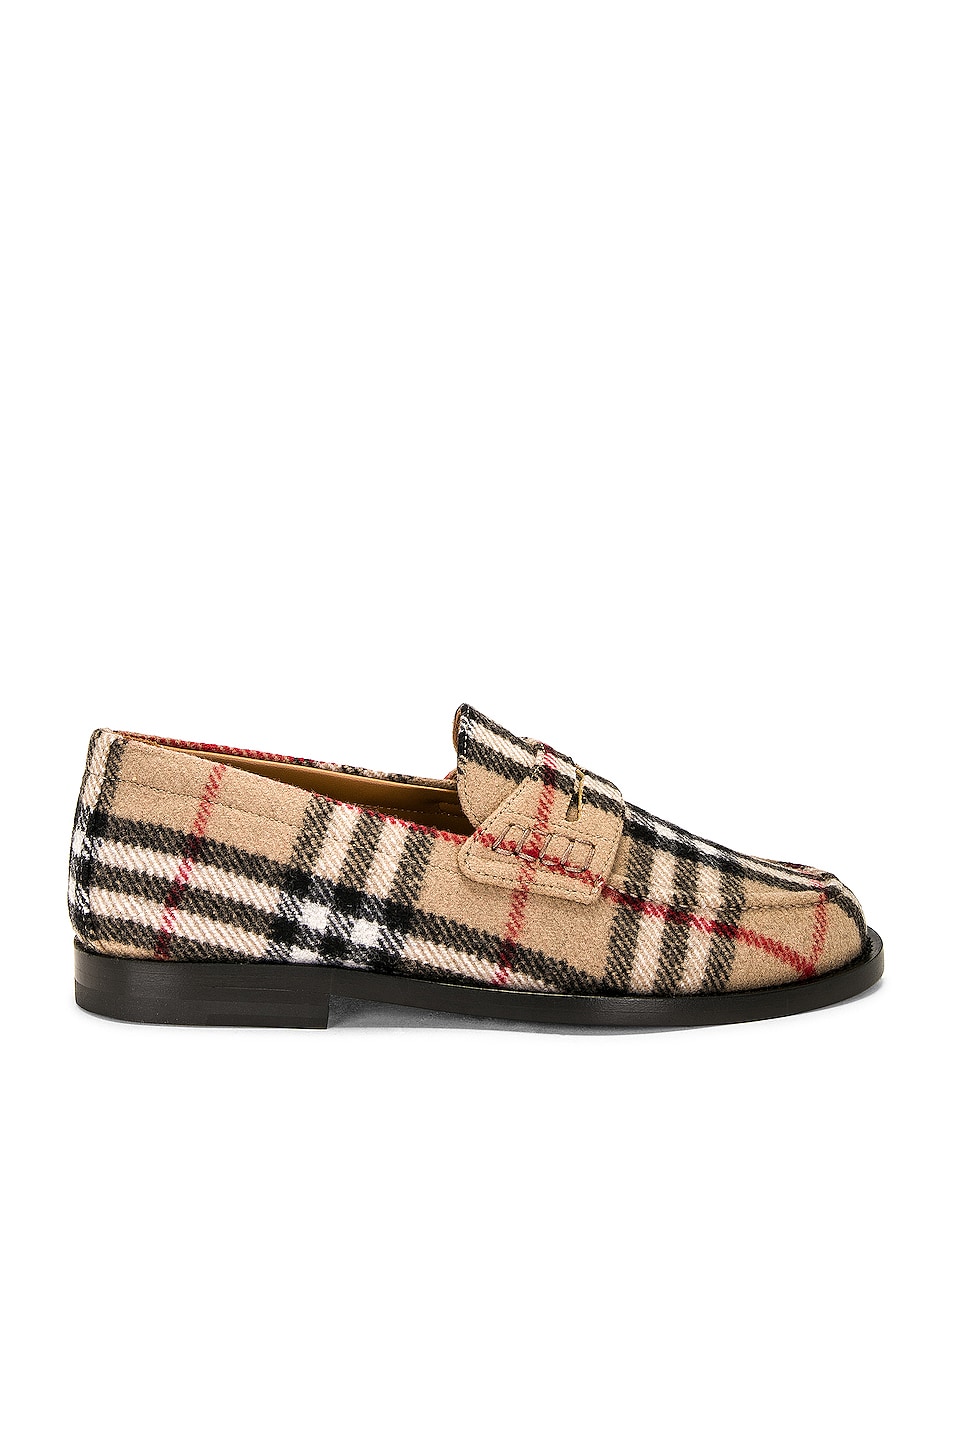 Image 1 of Burberry Hackney Loafer in Archive Beige IP Check